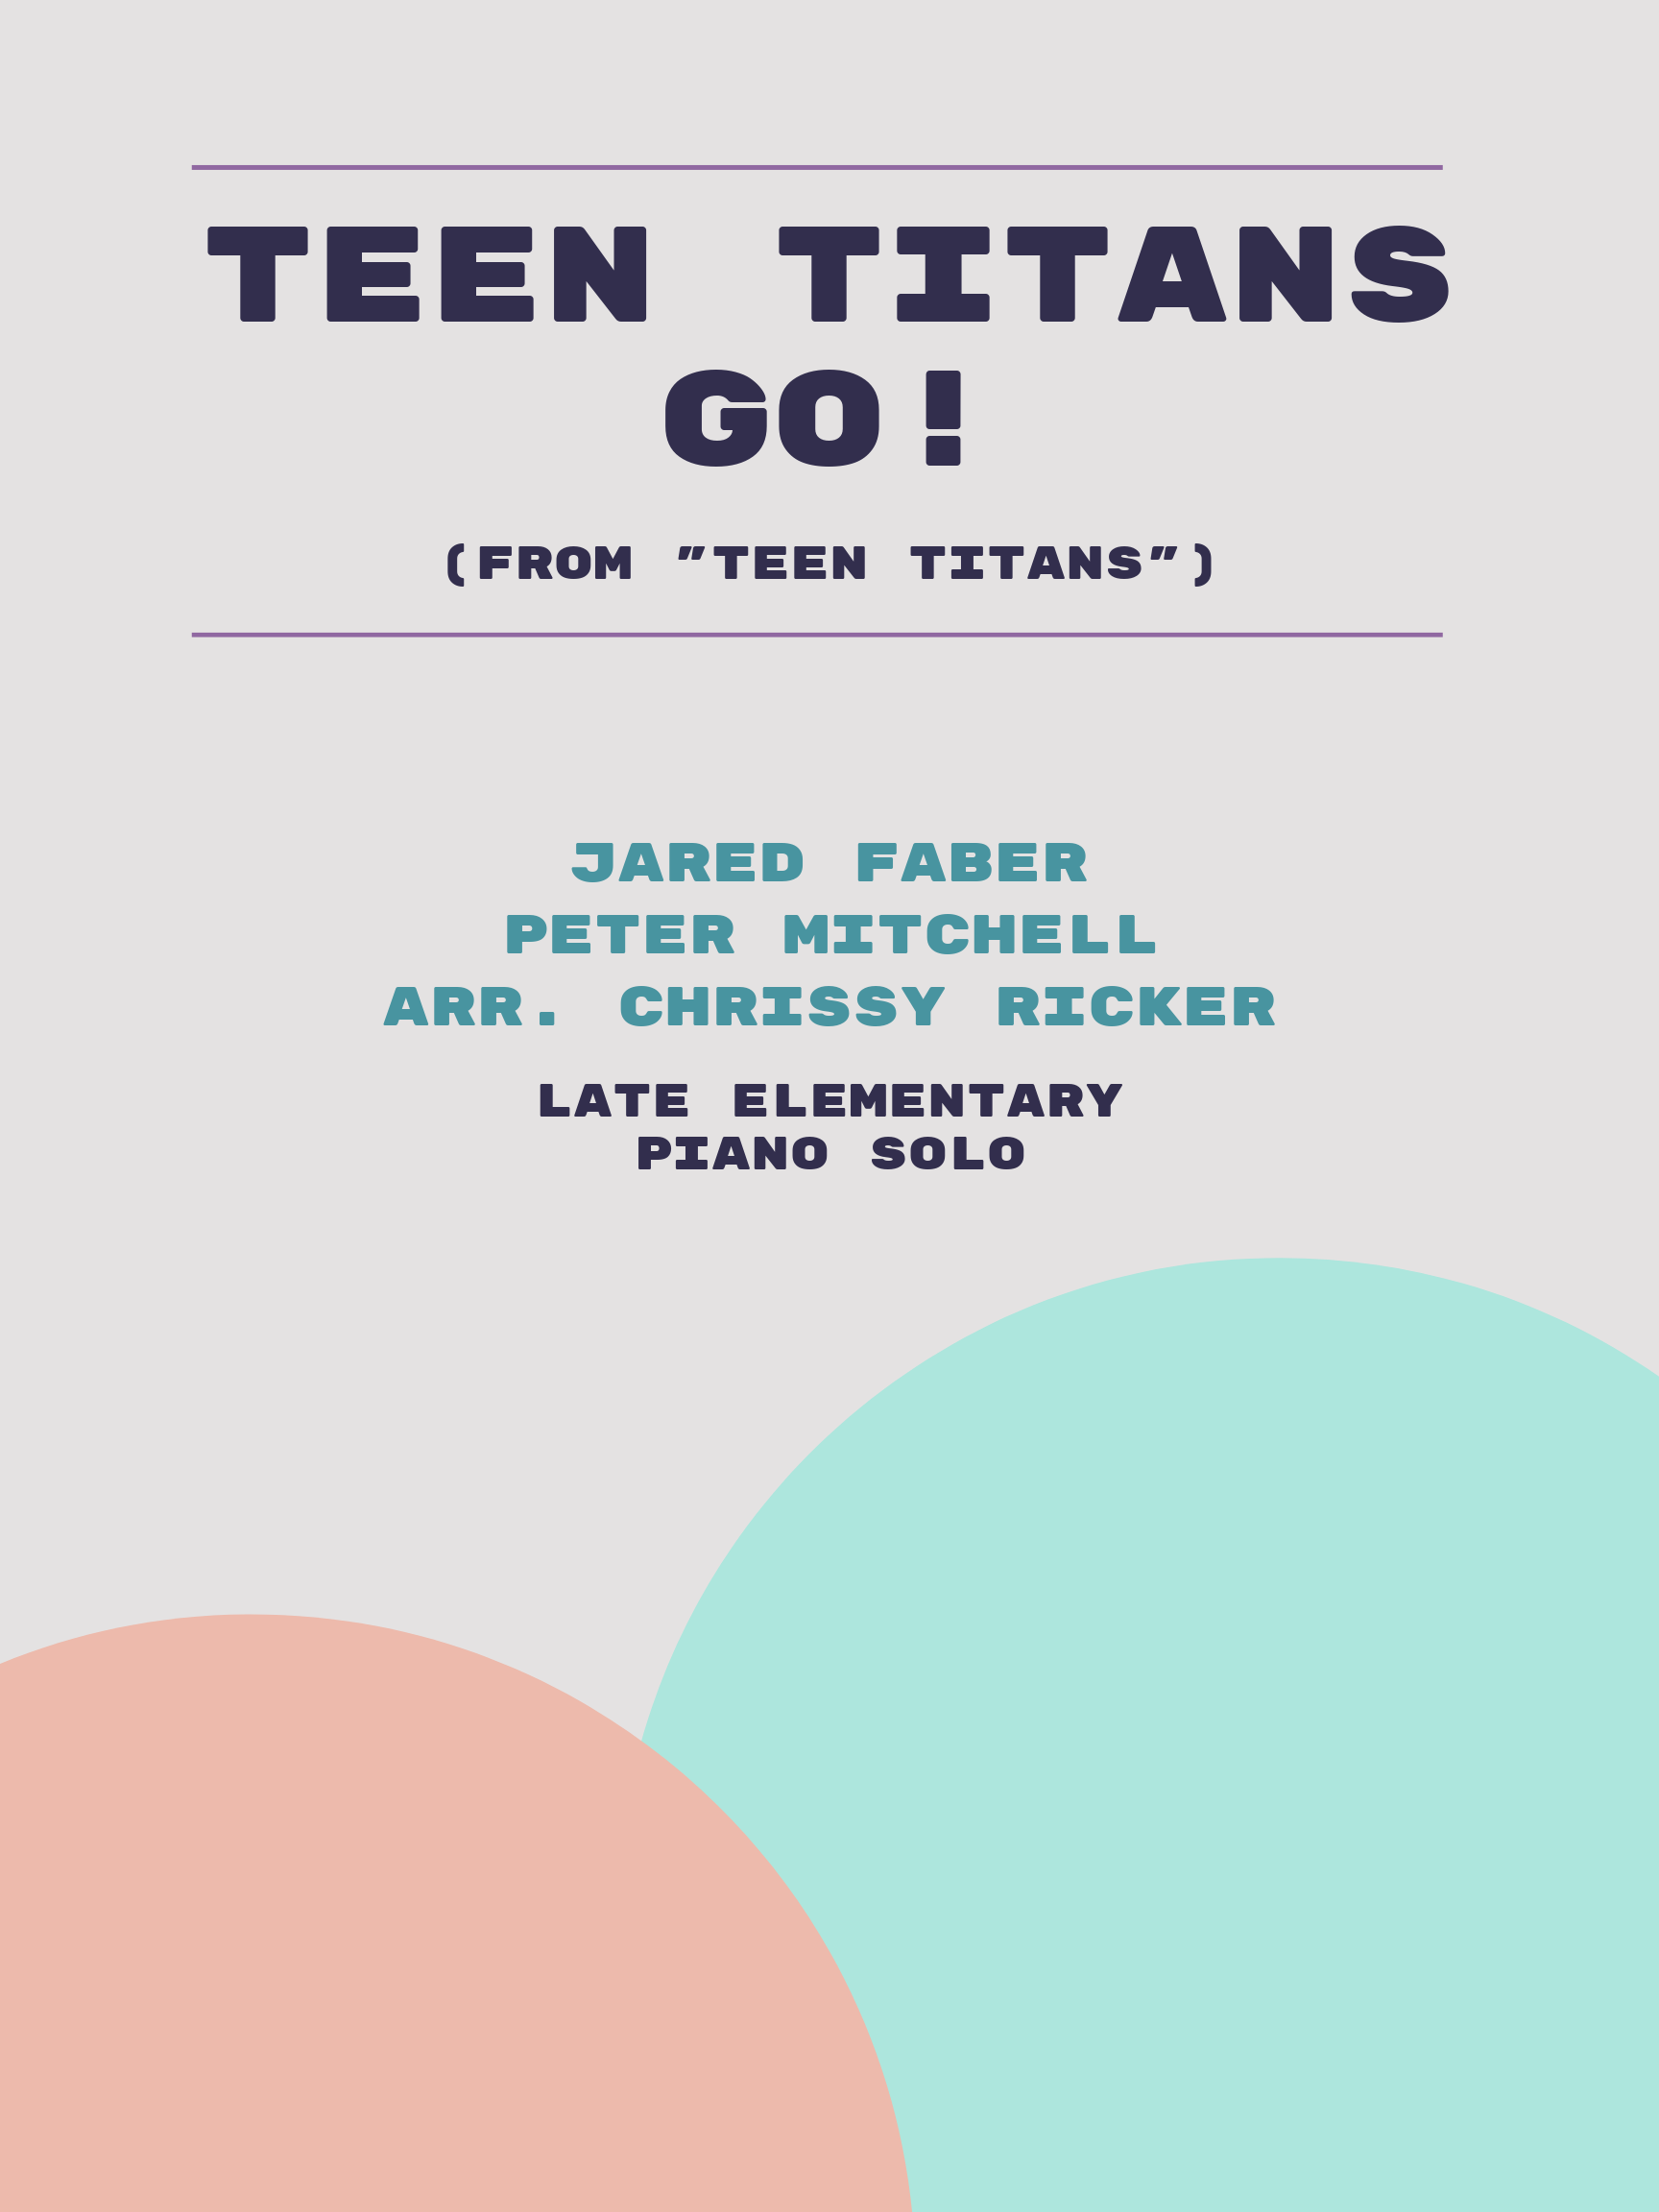 Teen Titans Go! by Jared Faber, Peter Mitchell